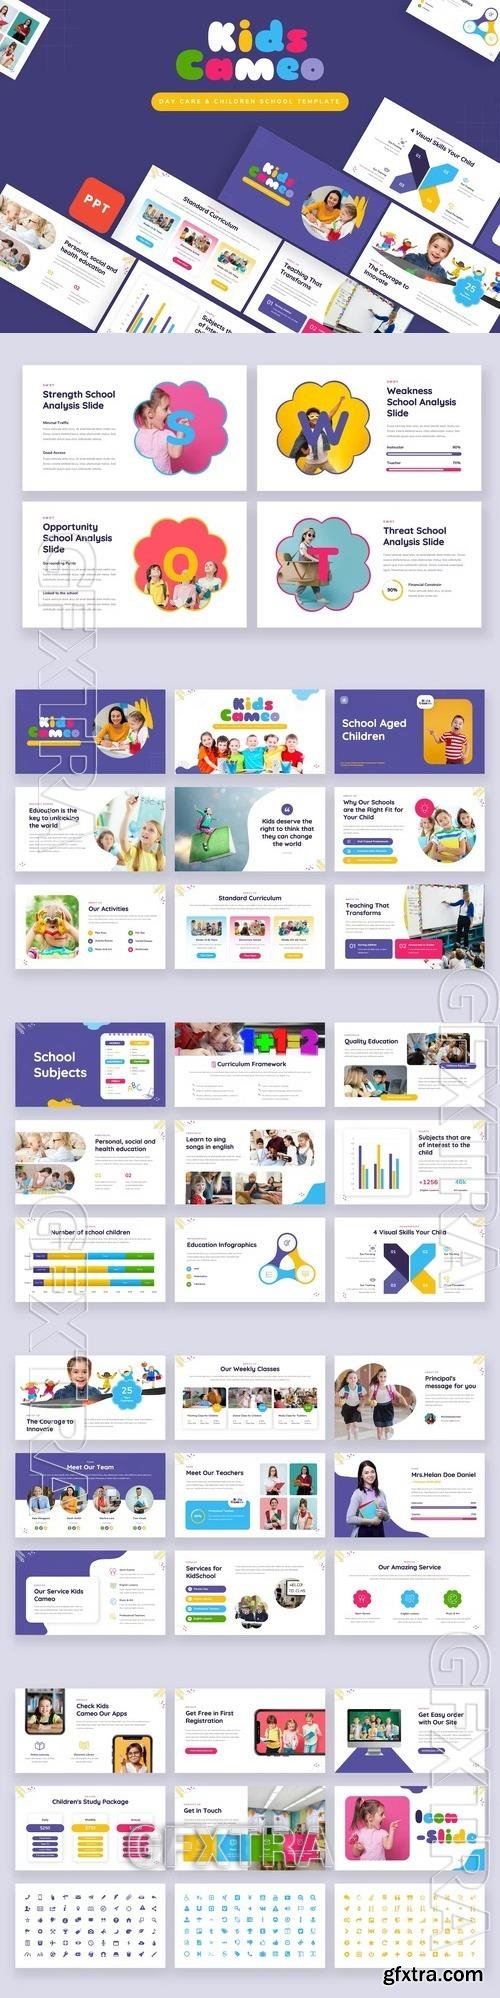 Kids Cameo - Day Care Powerpoint Template XDRWCQS